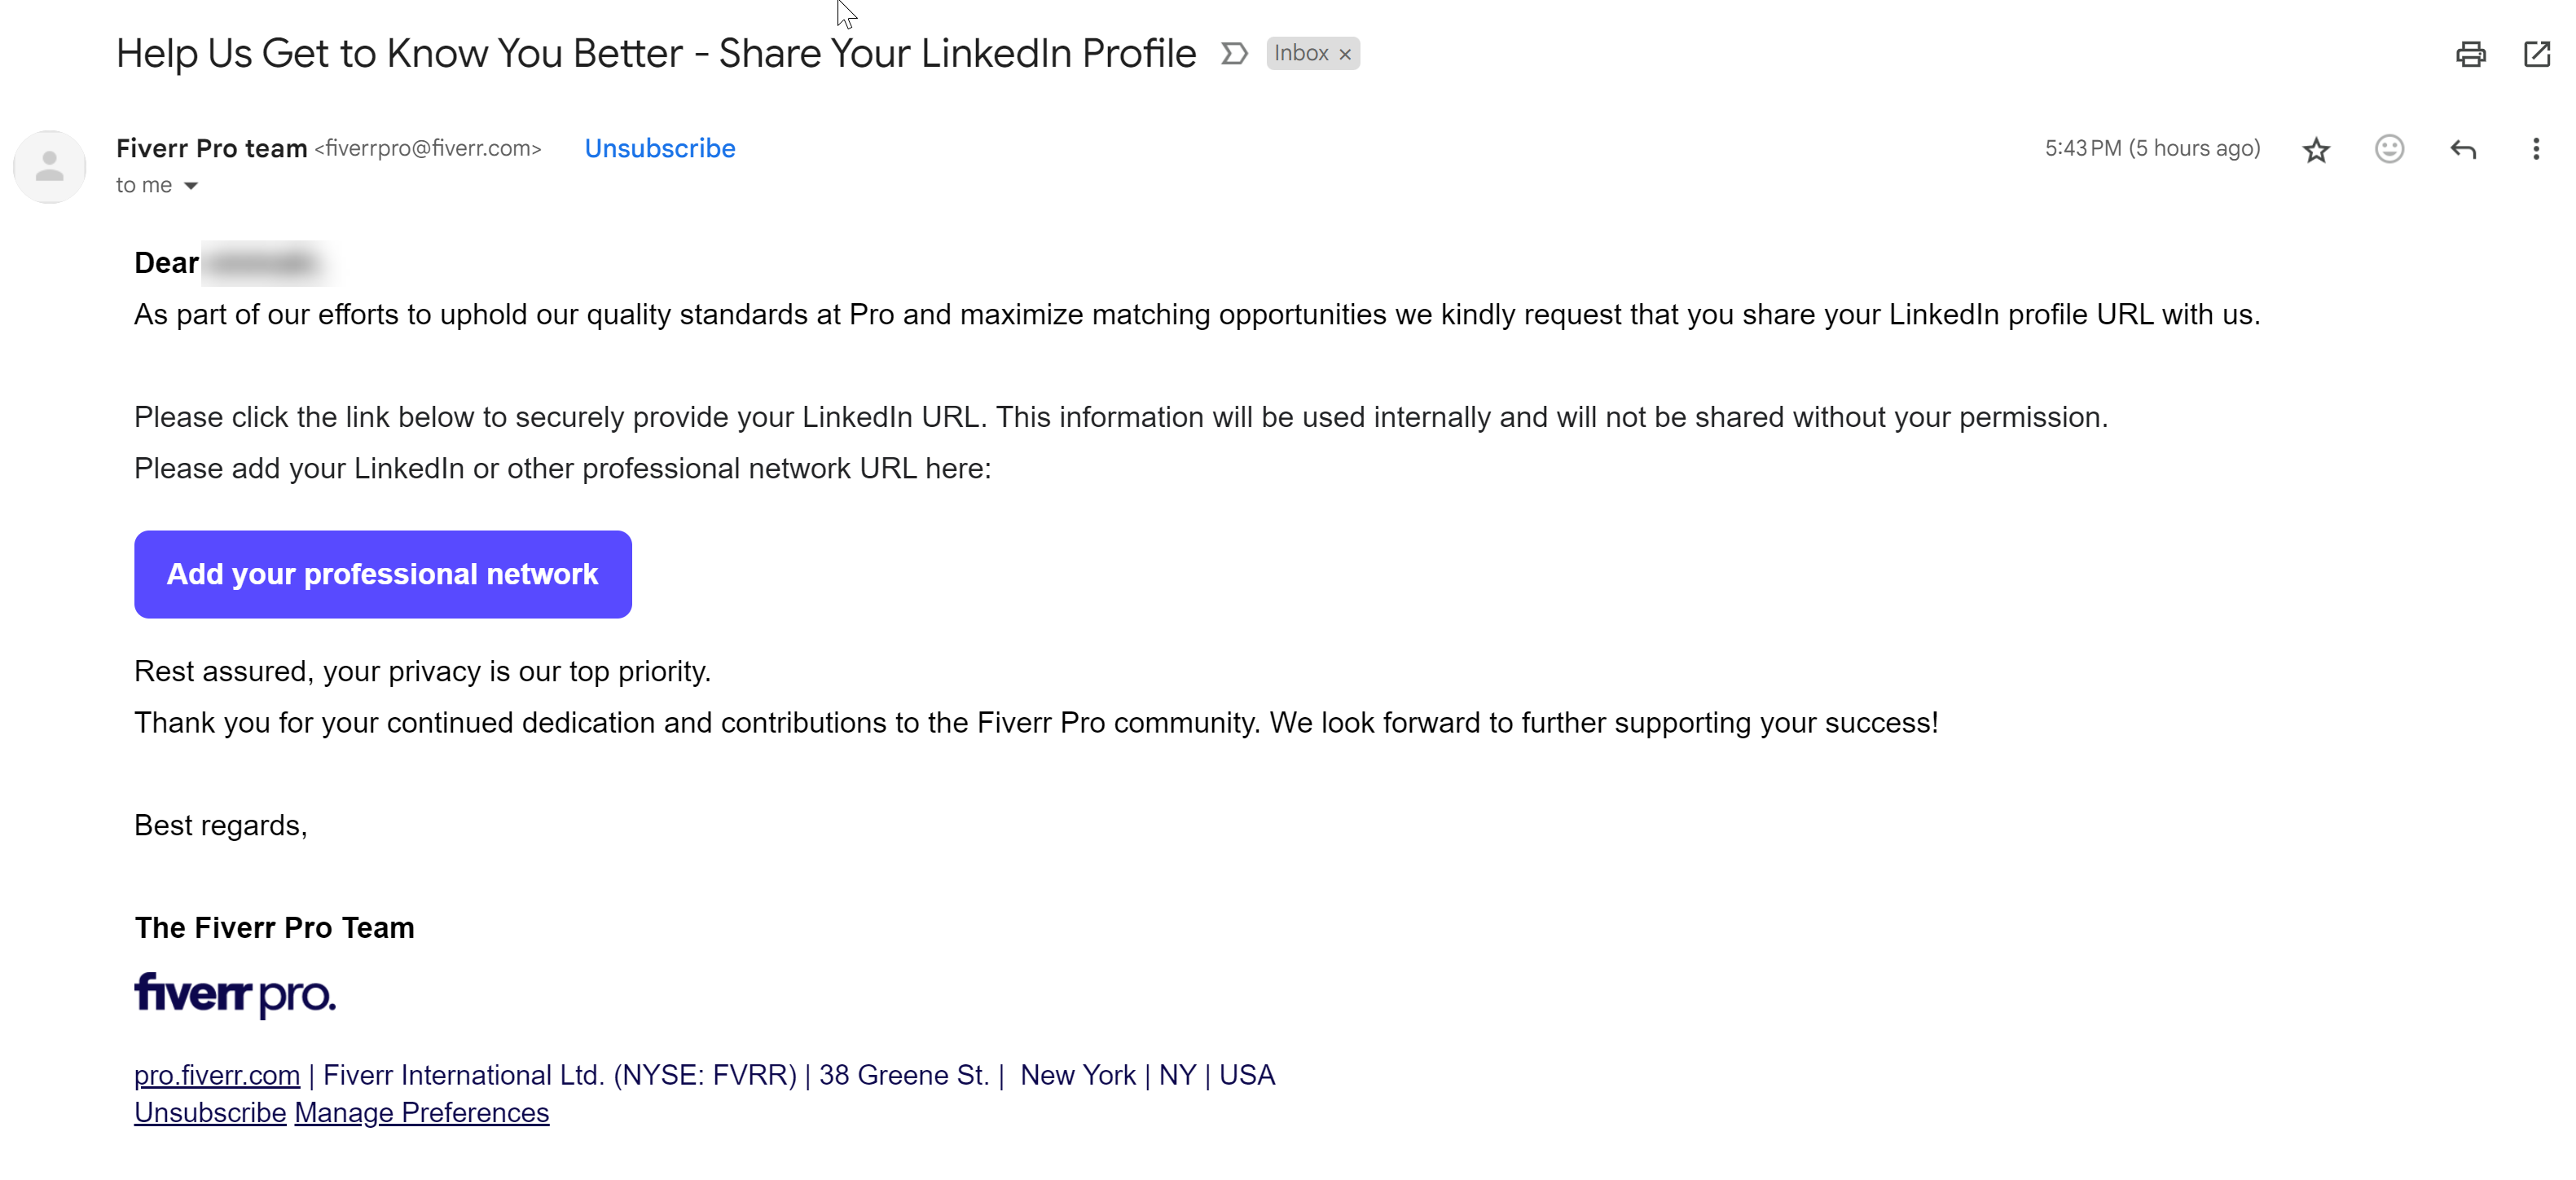 Fiverr Email about the new LinkedIn profile sharing